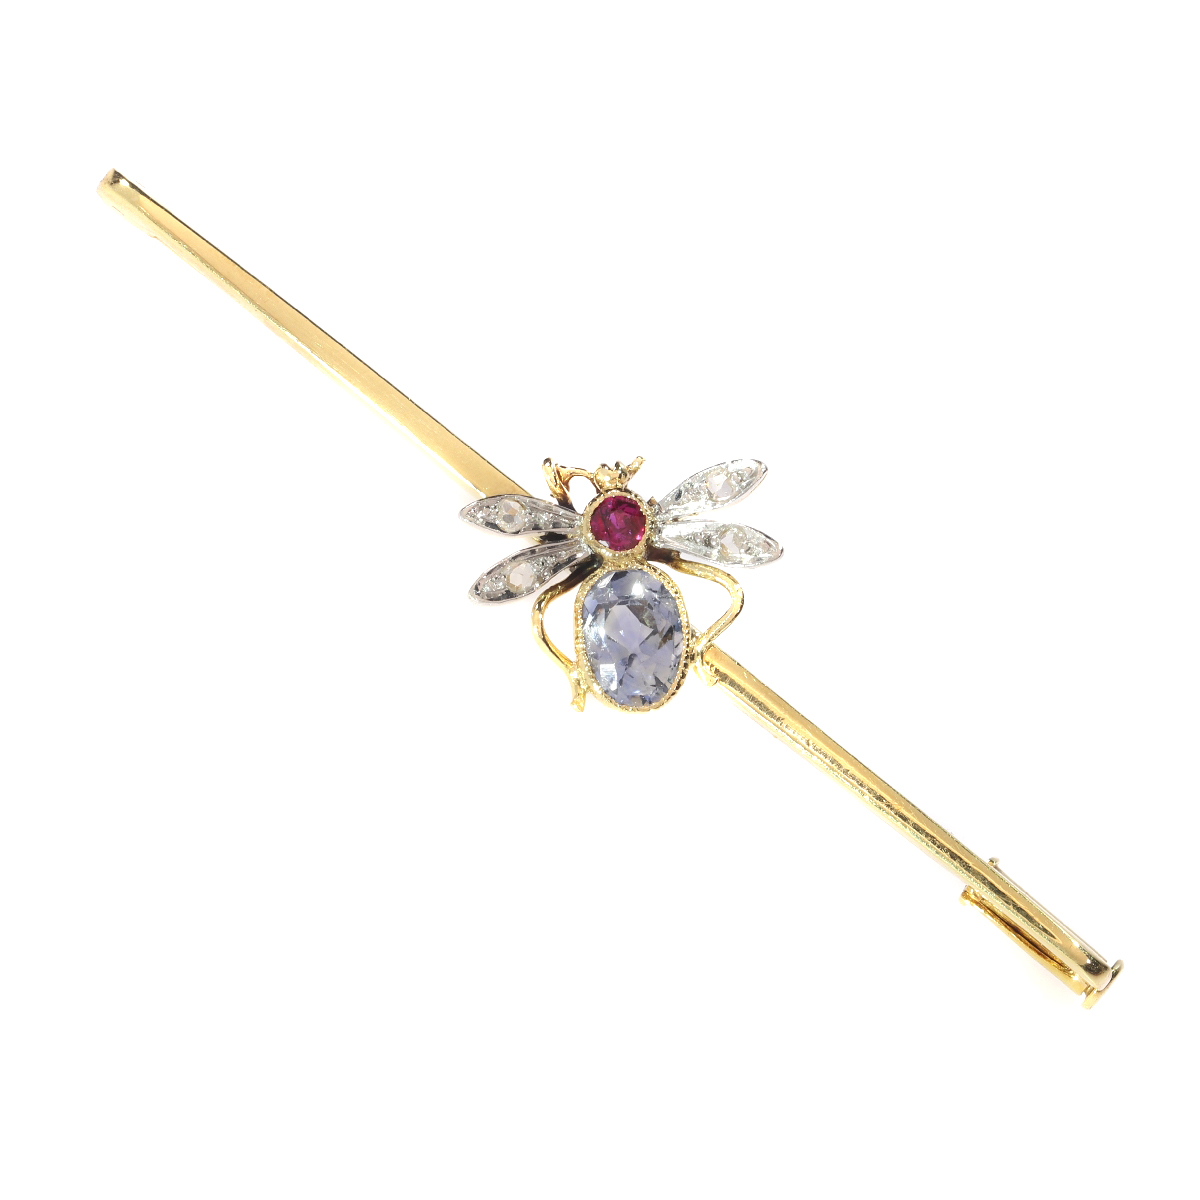 Vintage bar brooch with insect set with ruby, sapphire and rose cut diamonds